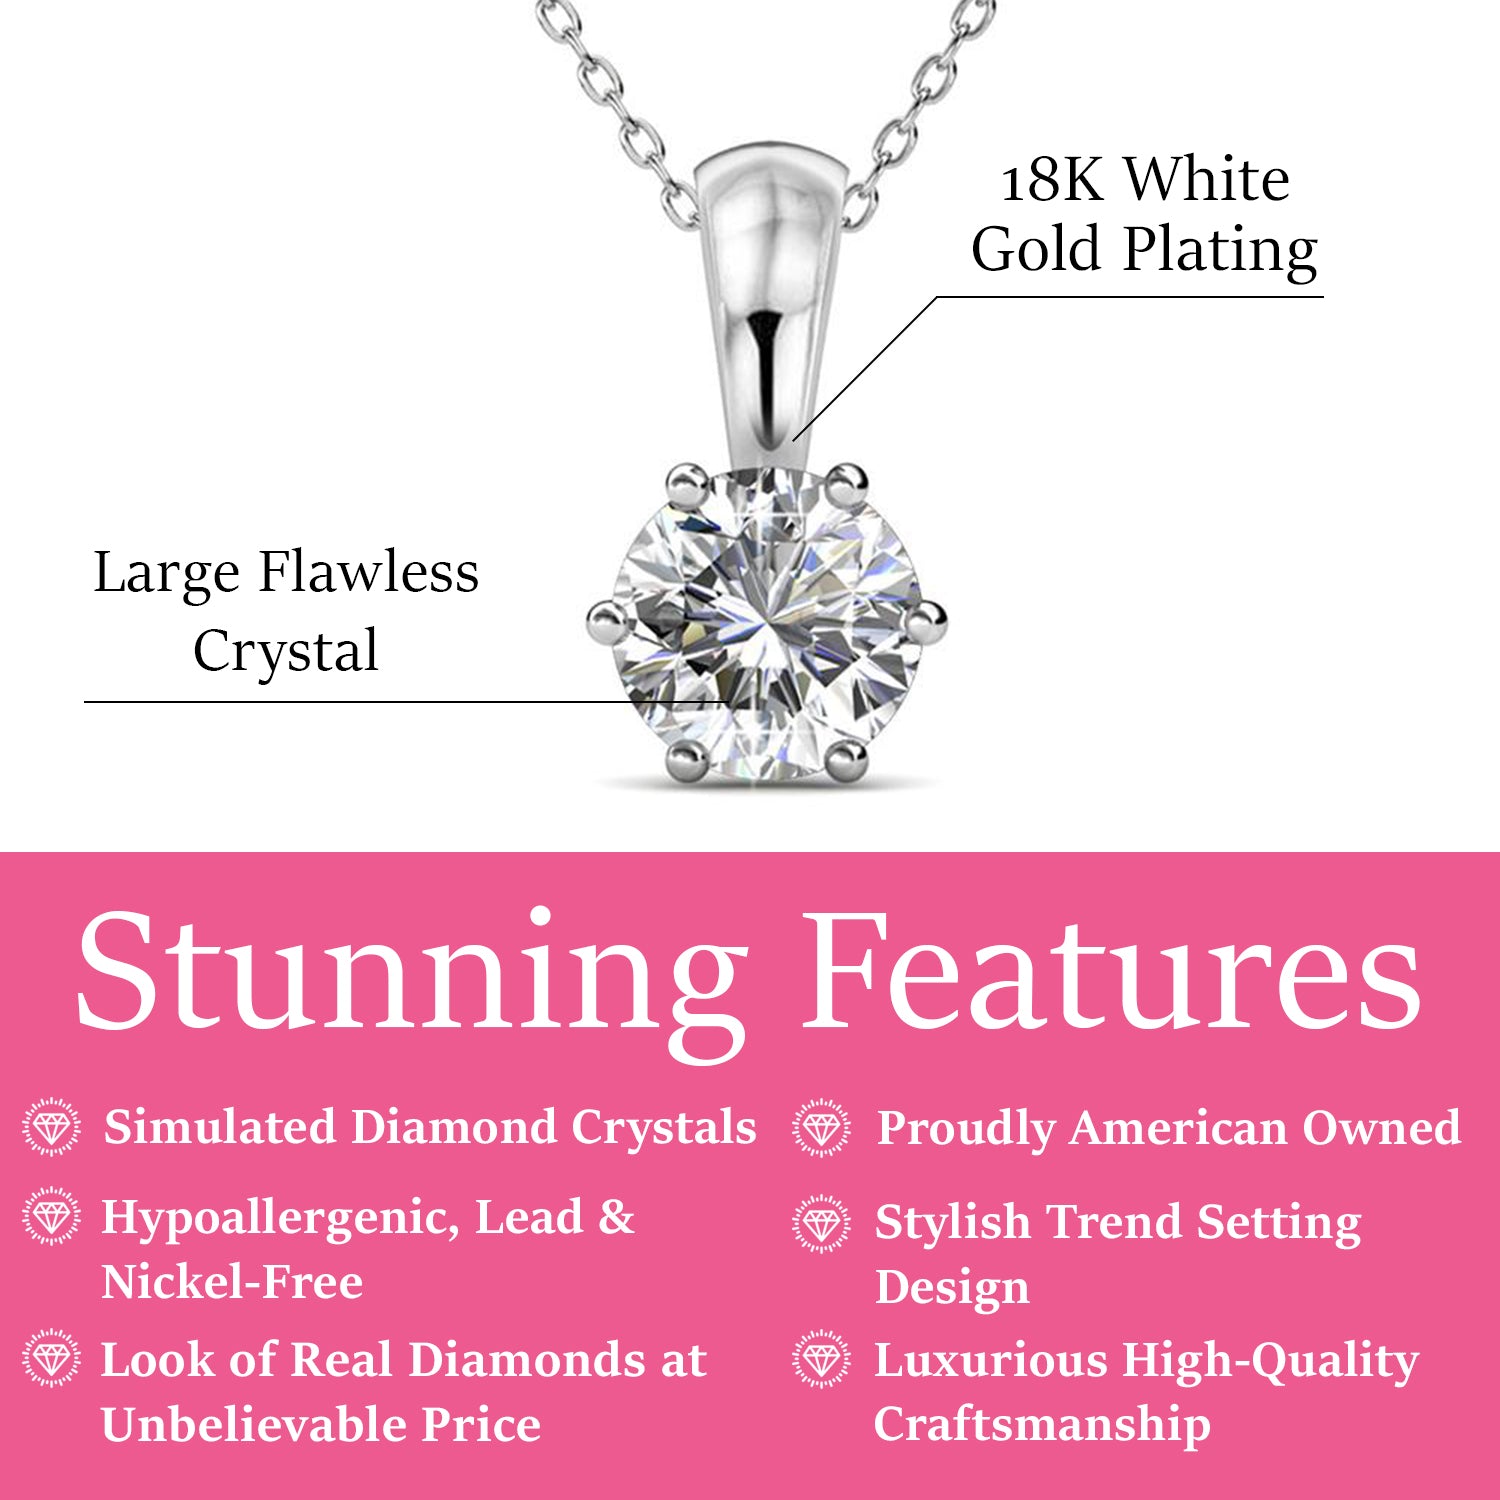 April Birthstone Diamond Necklace, 18k White Gold Plated Solitaire Necklace with 1CT Crystal